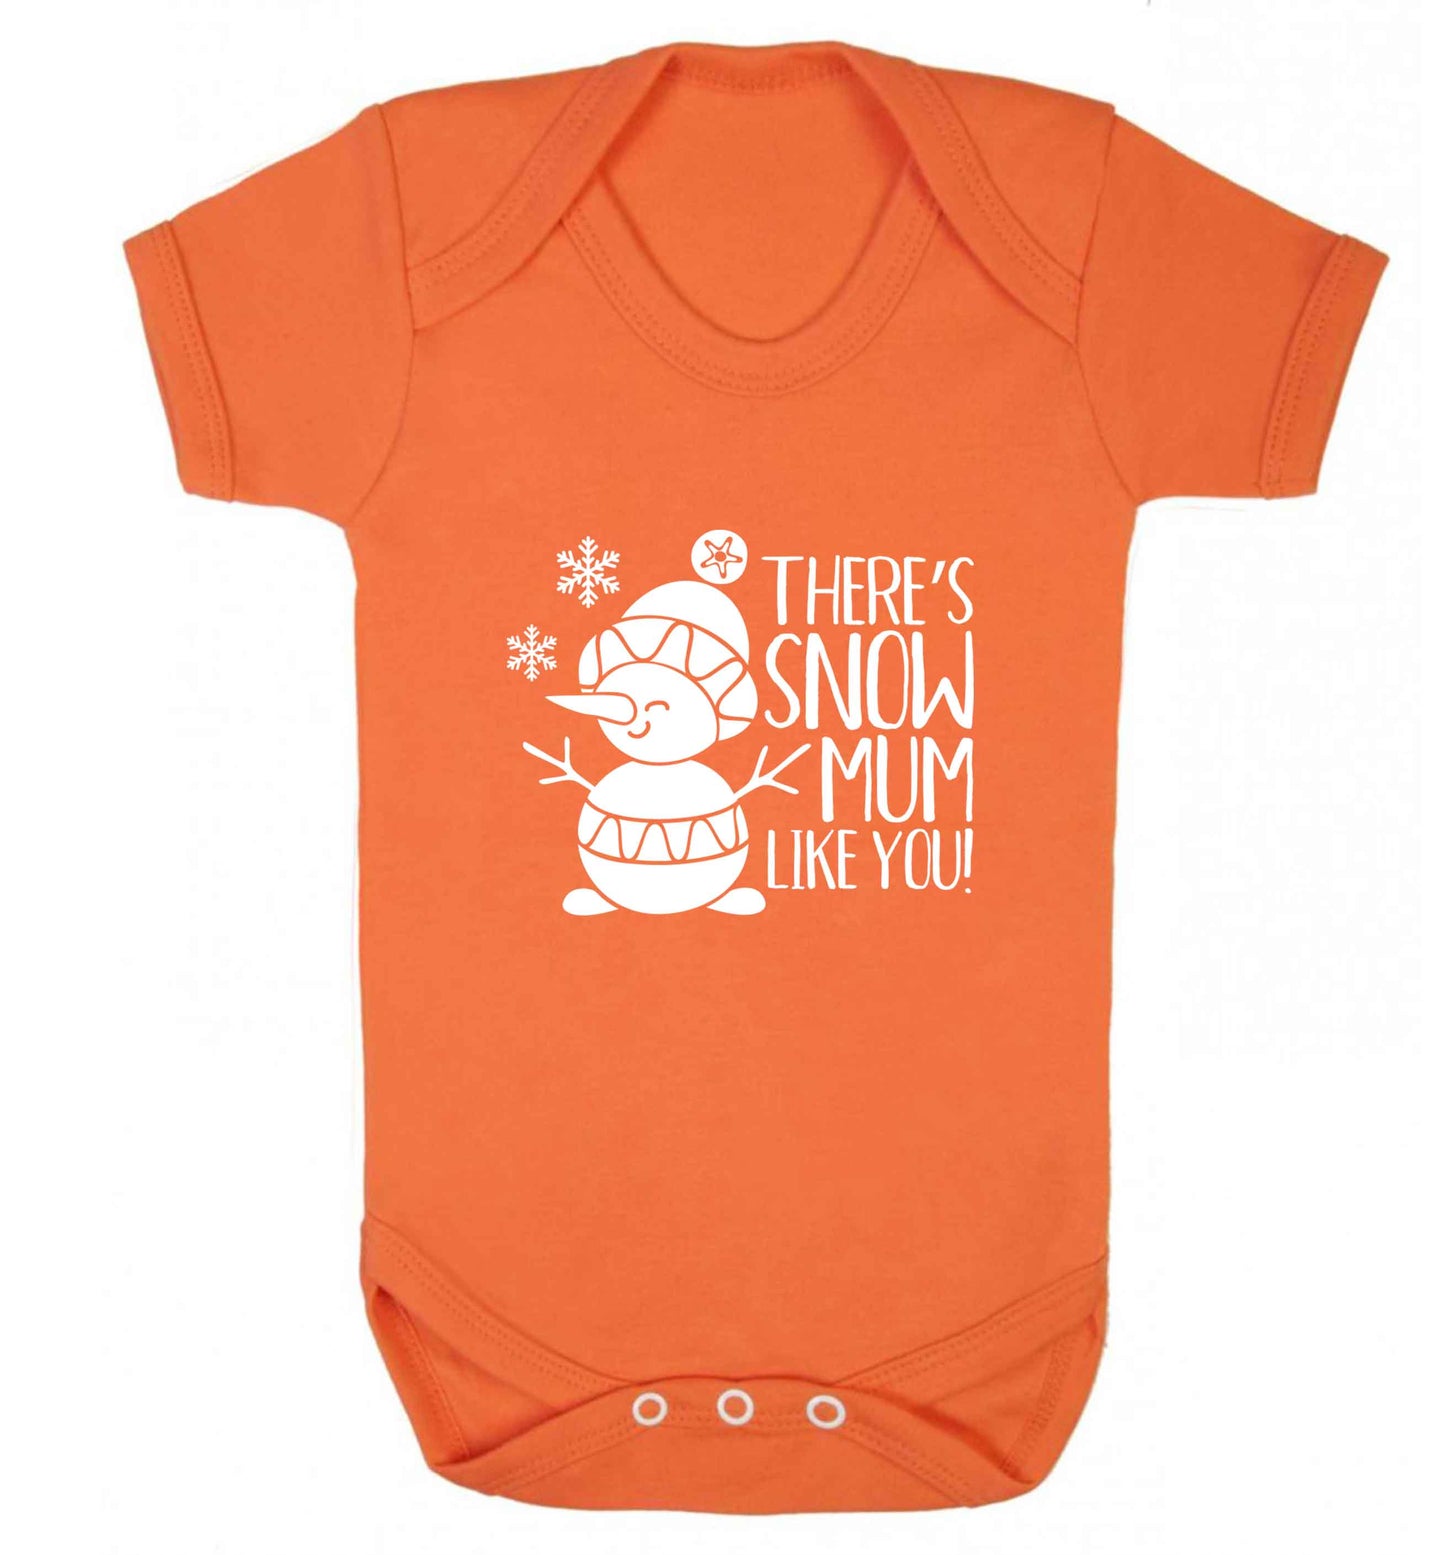 There's snow mum like you baby vest orange 18-24 months